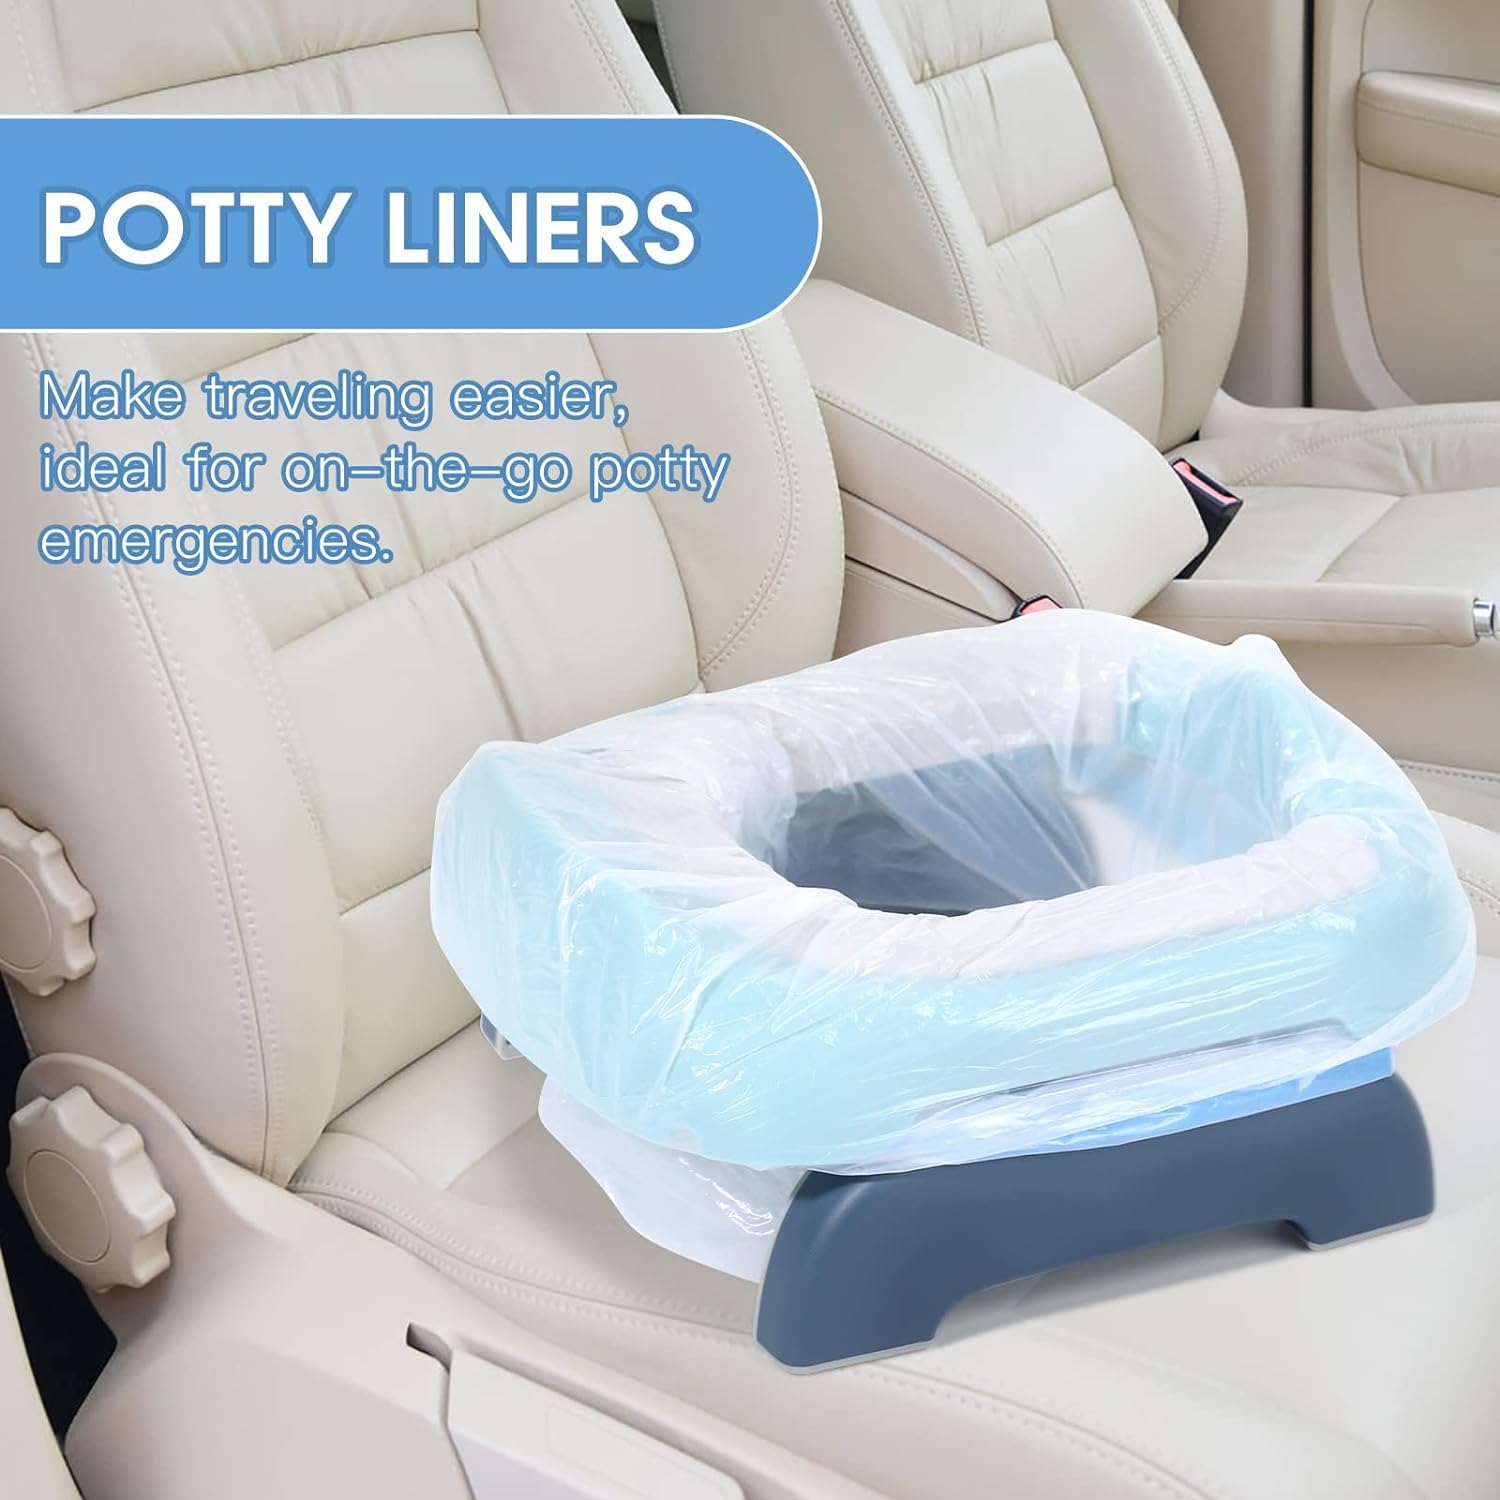 50 Pcs Potty Bags for Portable Toilet Universal Potty Chair Liners with Drawstring 17"x19" Potty Liners Disposable Training Toilet Seat Cleaning Bags for Kids Toddlers Adults Pets Outdoors